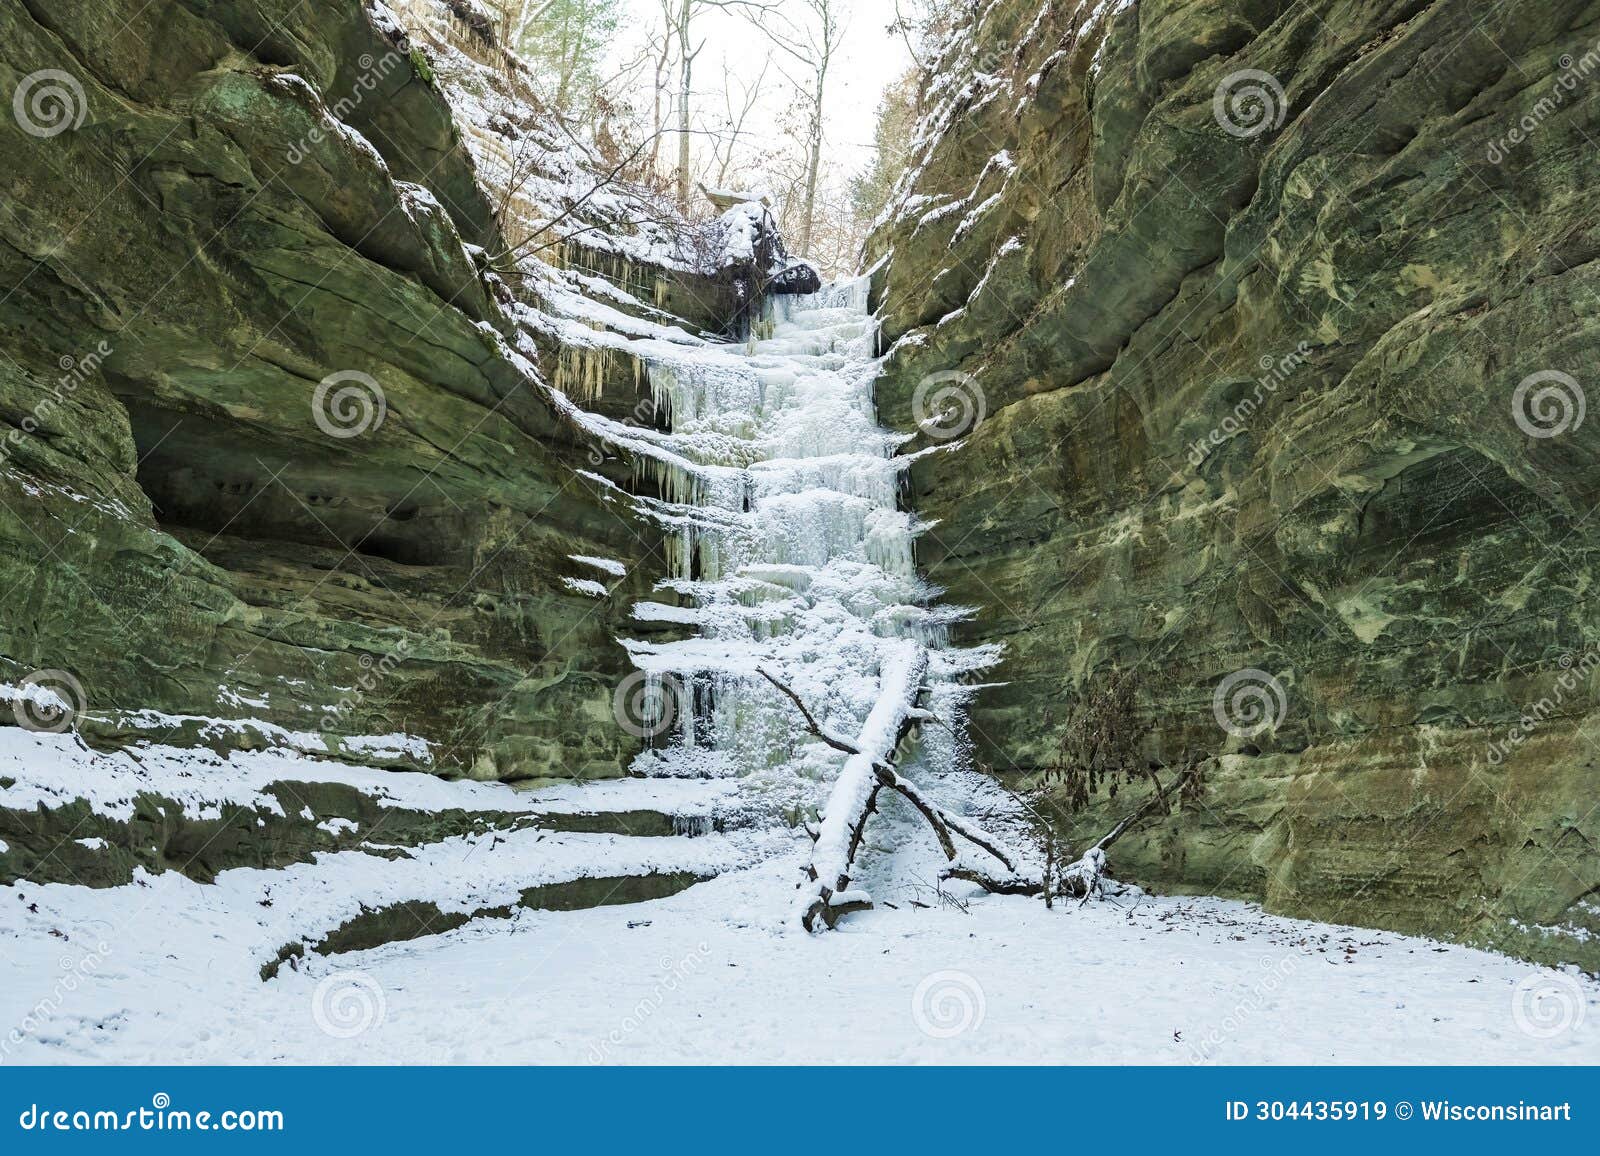 frozen ice waterfall, starved rock state park